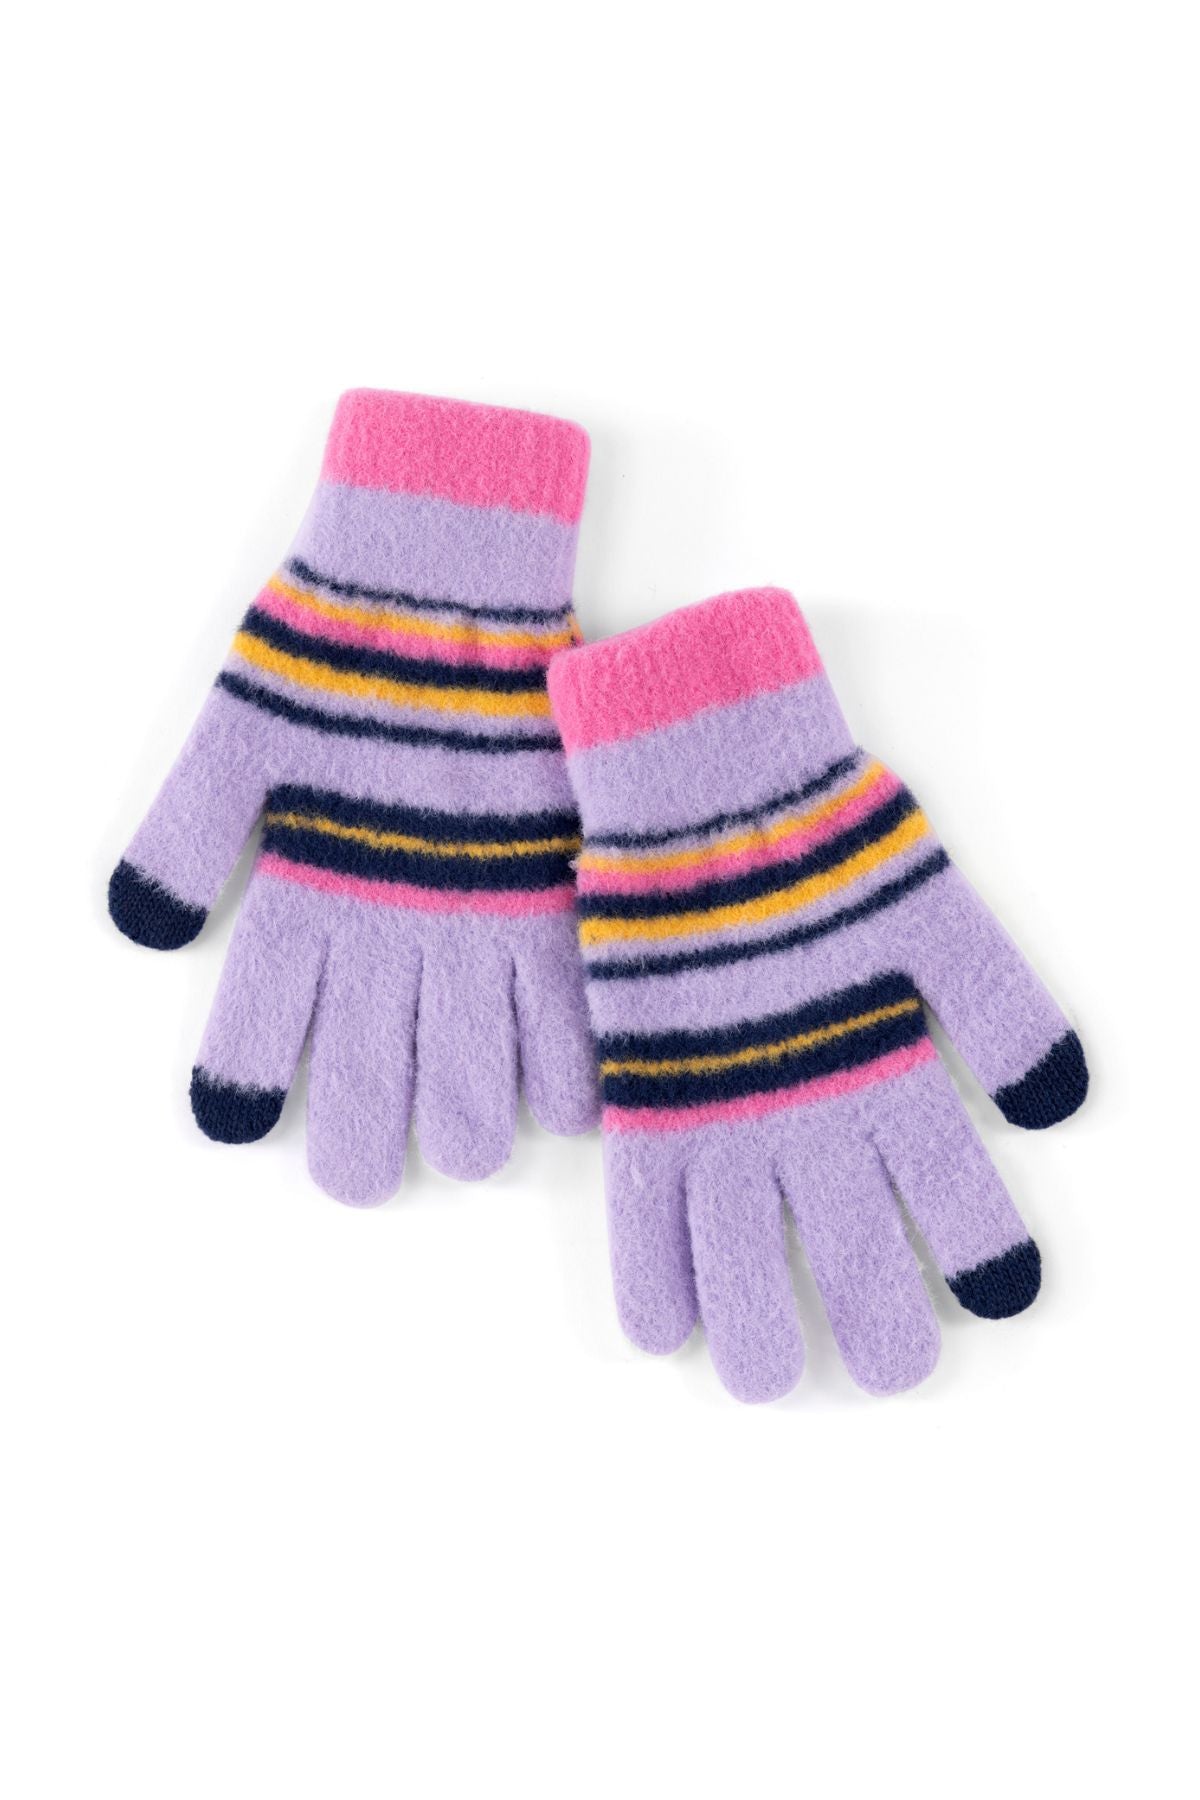 Lilac striped gloves